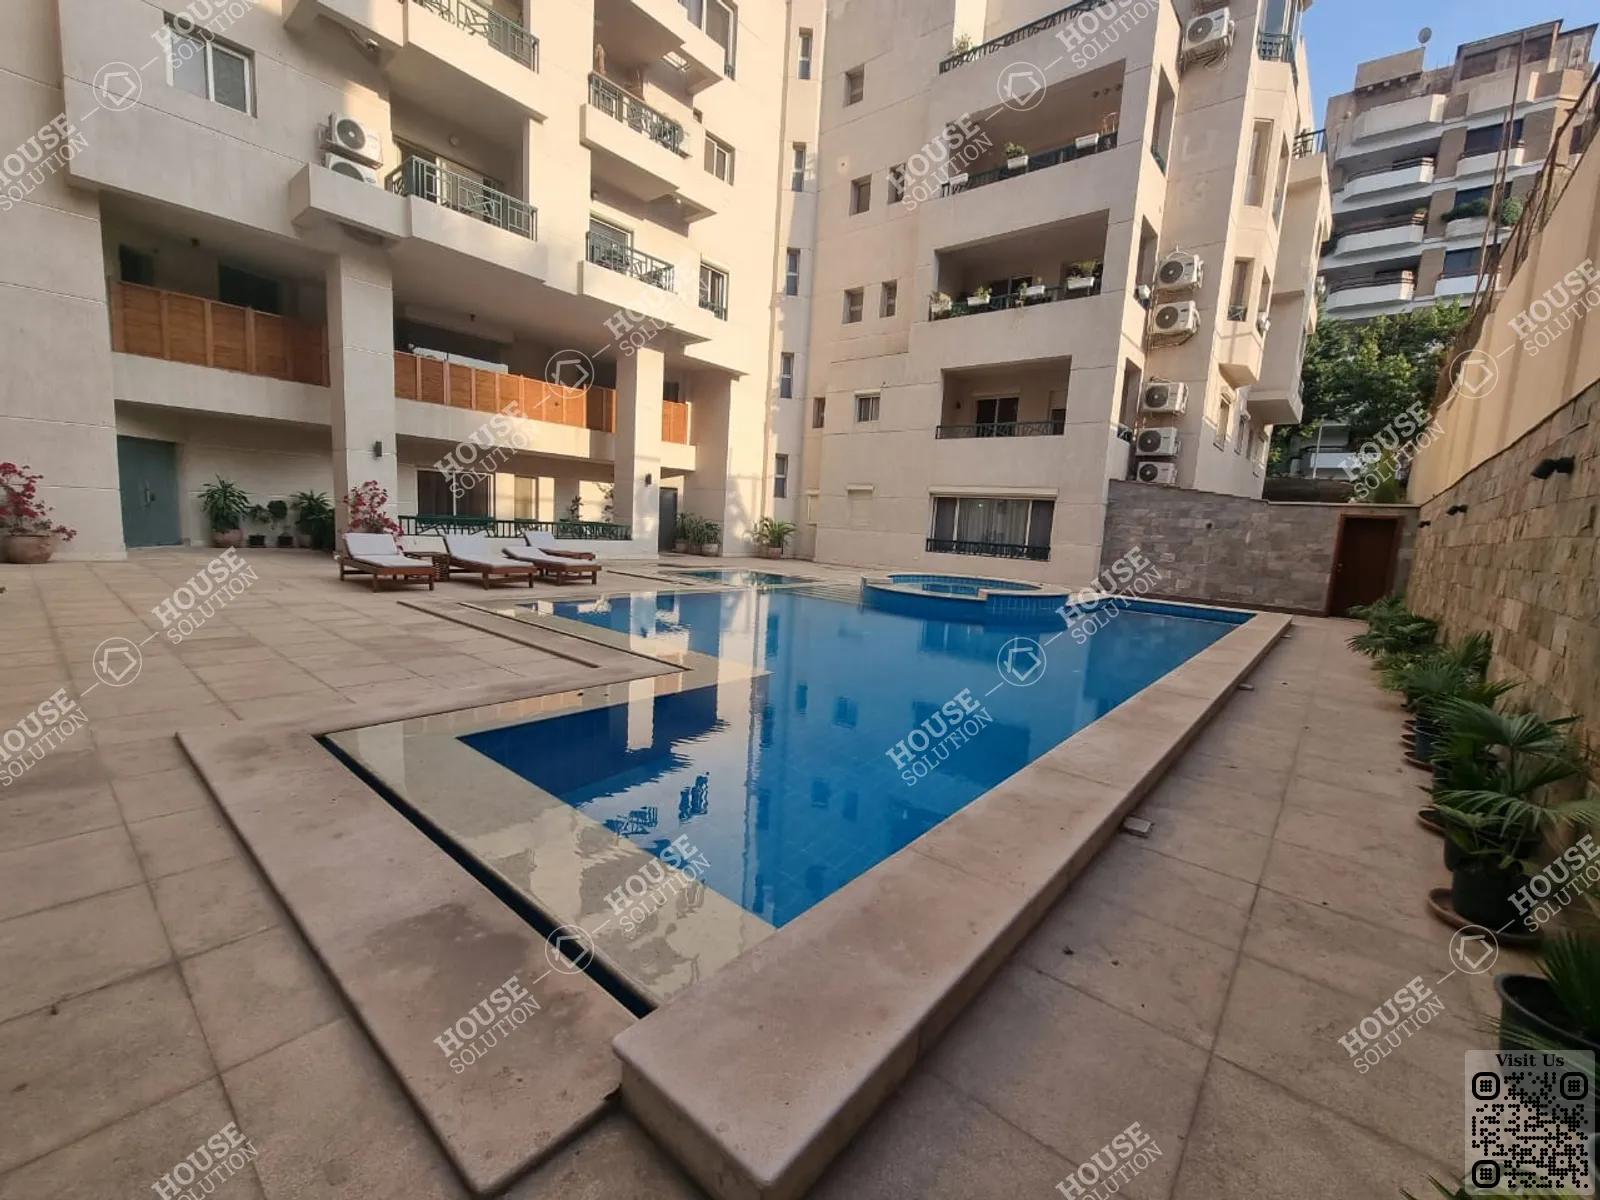 SHARED SWIMMING POOL  @ Apartments For Rent In Maadi Maadi Sarayat Area: 250 m² consists of 3 Bedrooms 3 Bathrooms Modern furnished 5 stars #5106-2